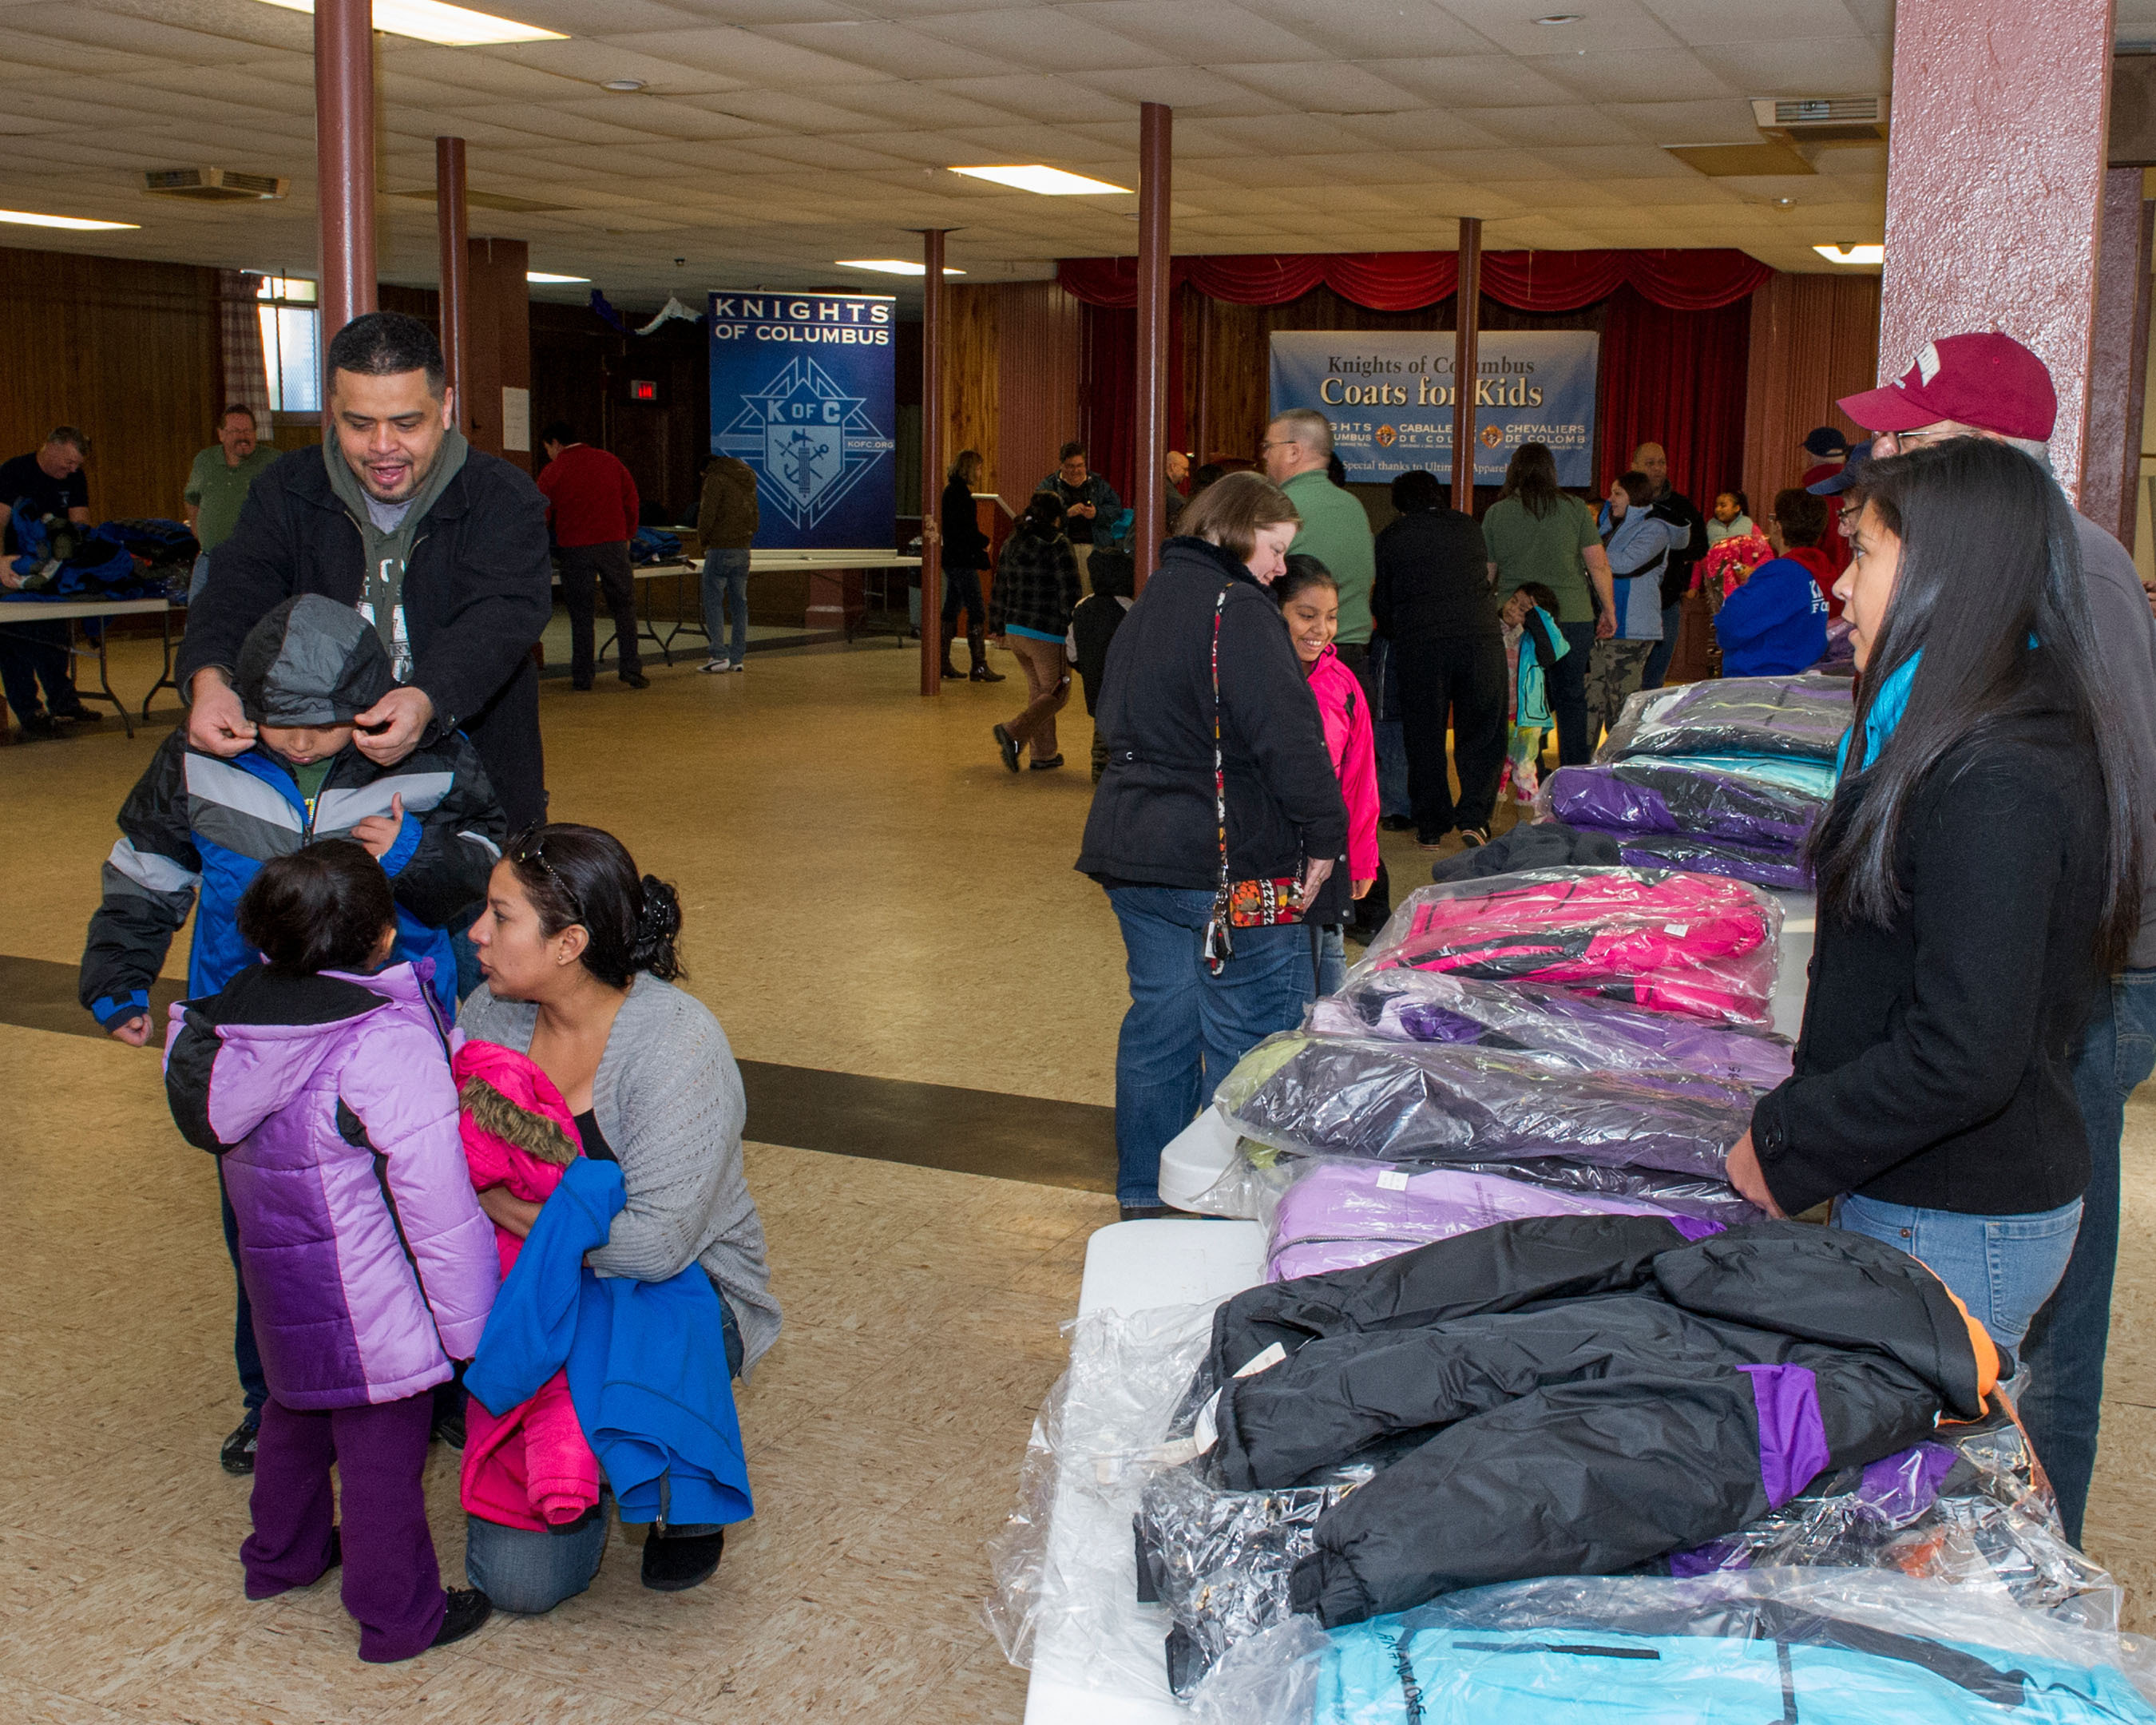 Children - accompanied by their parents - receive free winter coats from the Knights of Columbus at St. Rose Church in New Haven.More than 2000 coats were distributed statewide by the Knights of Columbuson Friday, Nov. 29. (PRNewsFoto/Knights of Columbus) (PRNewsFoto/KNIGHTS OF COLUMBUS)